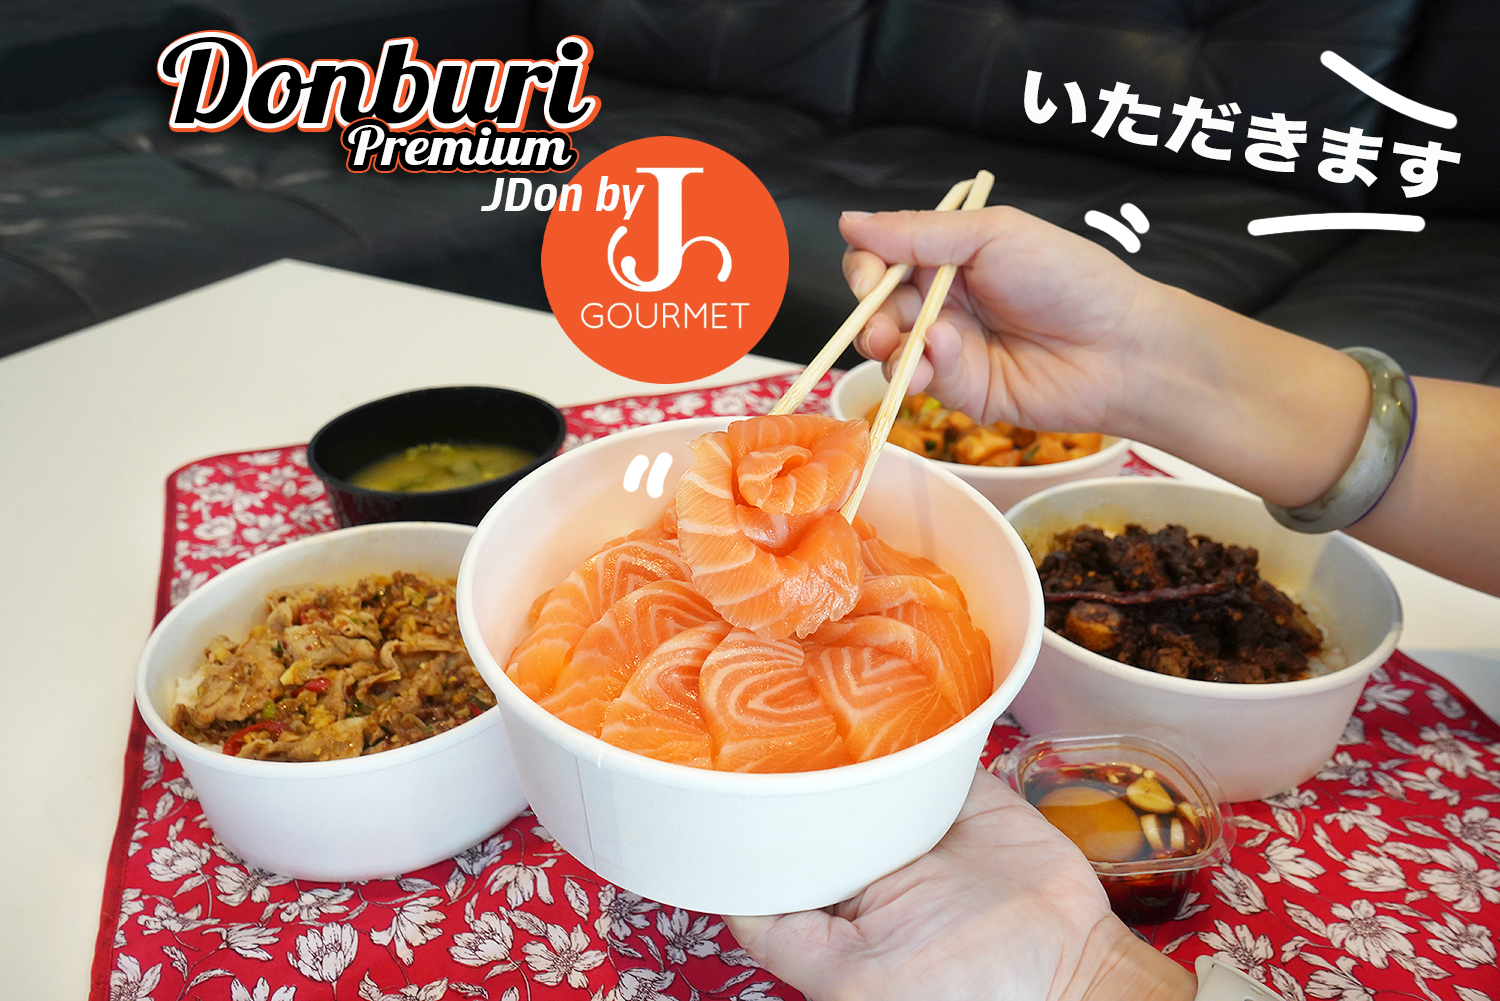 Donburi Premium Ready to Eat JDon by J GOURMET Delivery 0